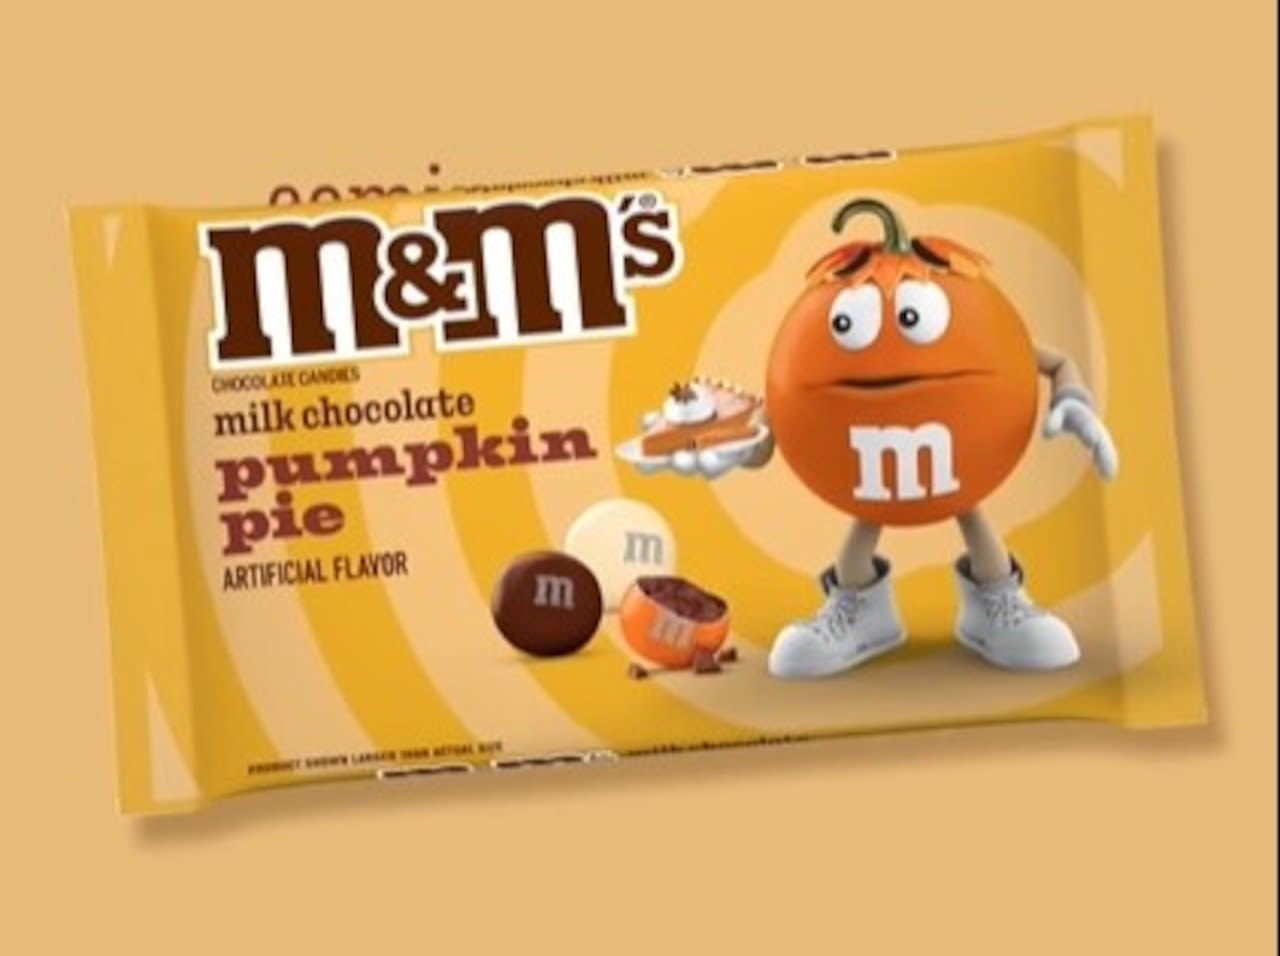 M&M’s just announced an unusual new fall flavor